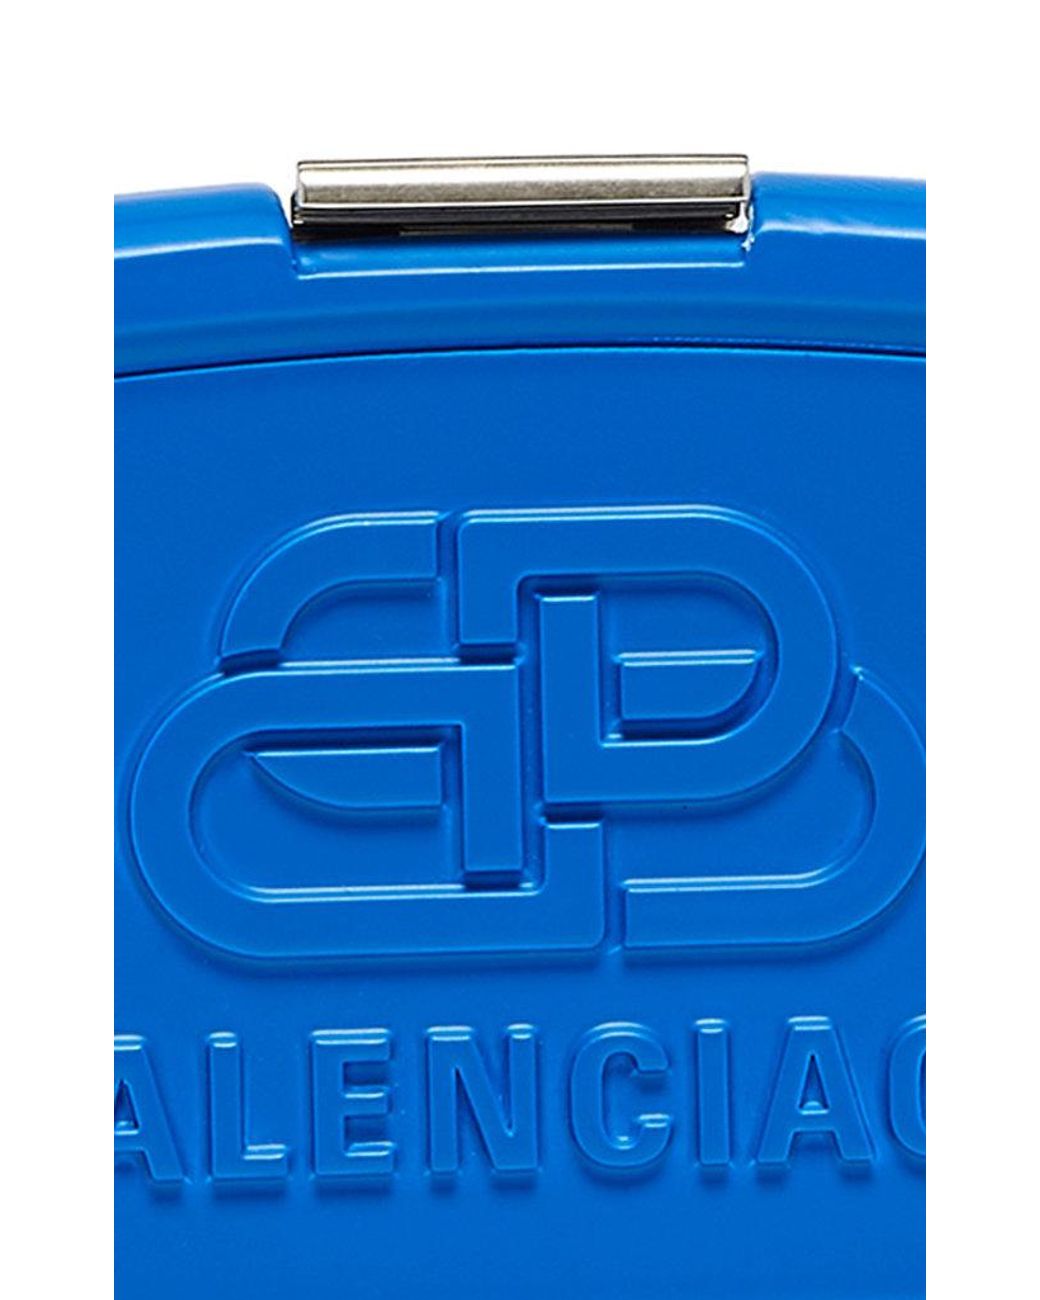 BALENCIAGA Recycled Plastic Calfskin Embossed Mini Lunch Box Case